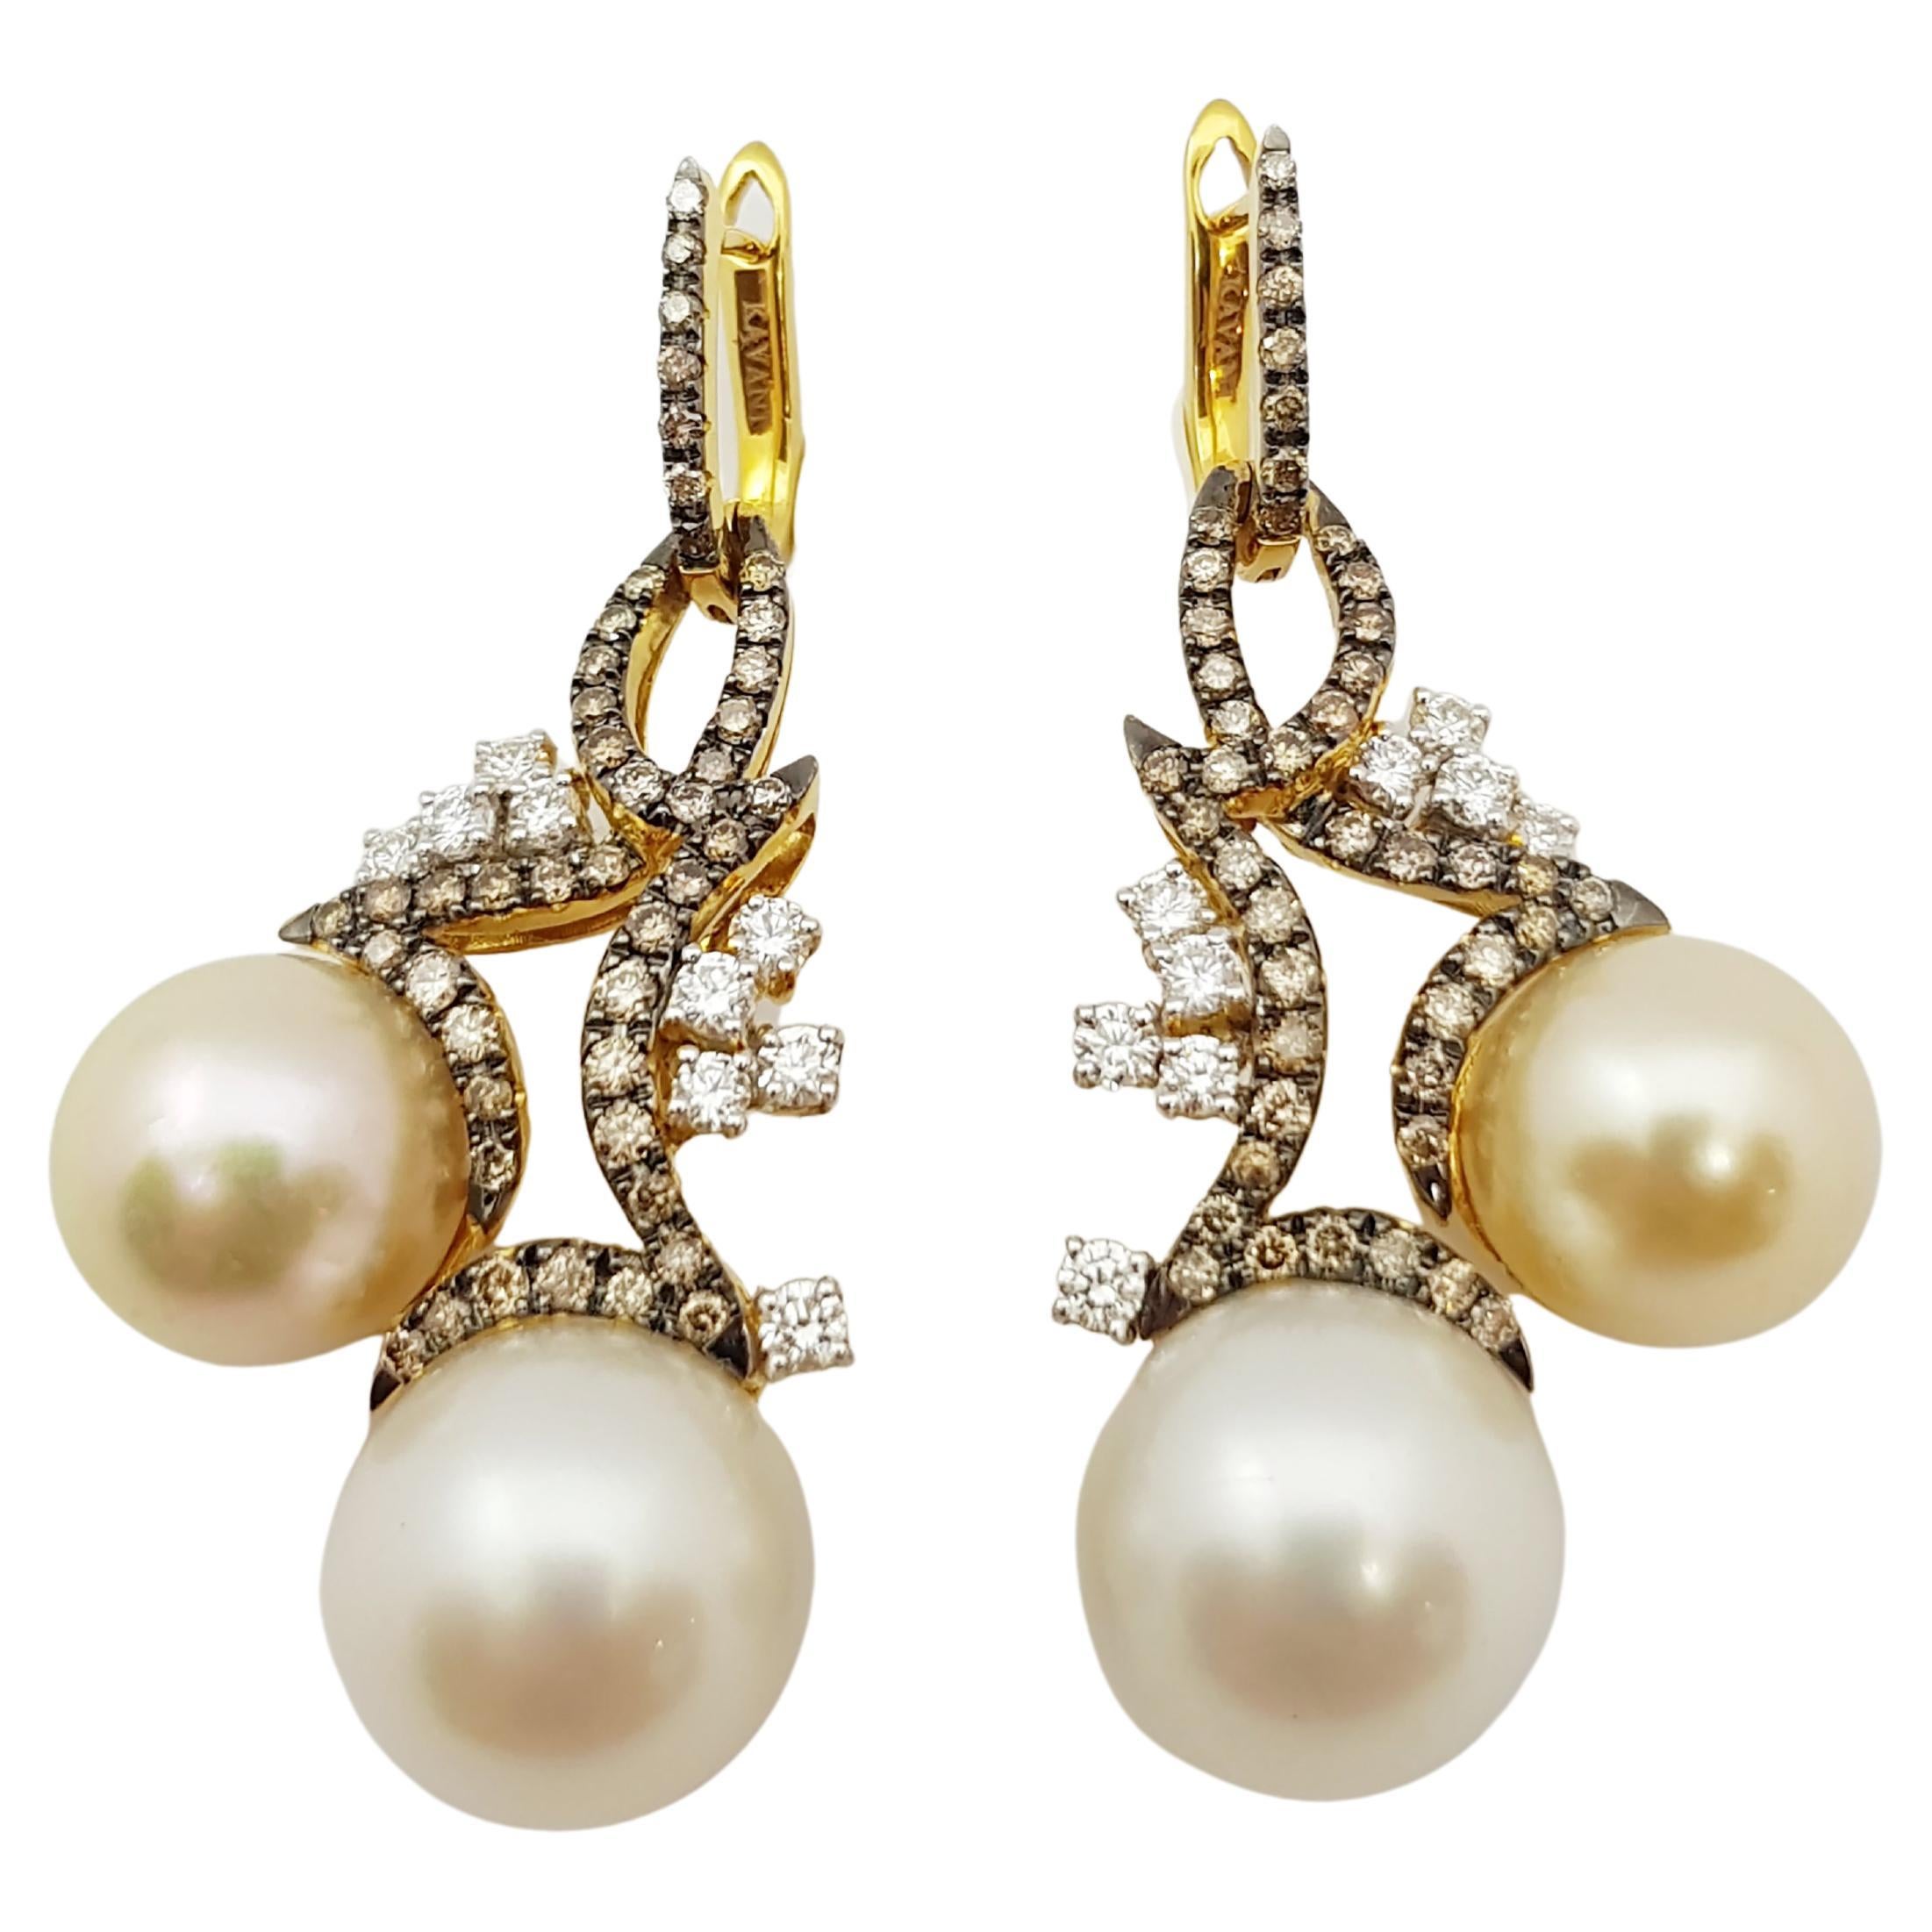 South Sea Pearl with Brown Diamond and Diamond Earrings Set in 18 Karat Gold 